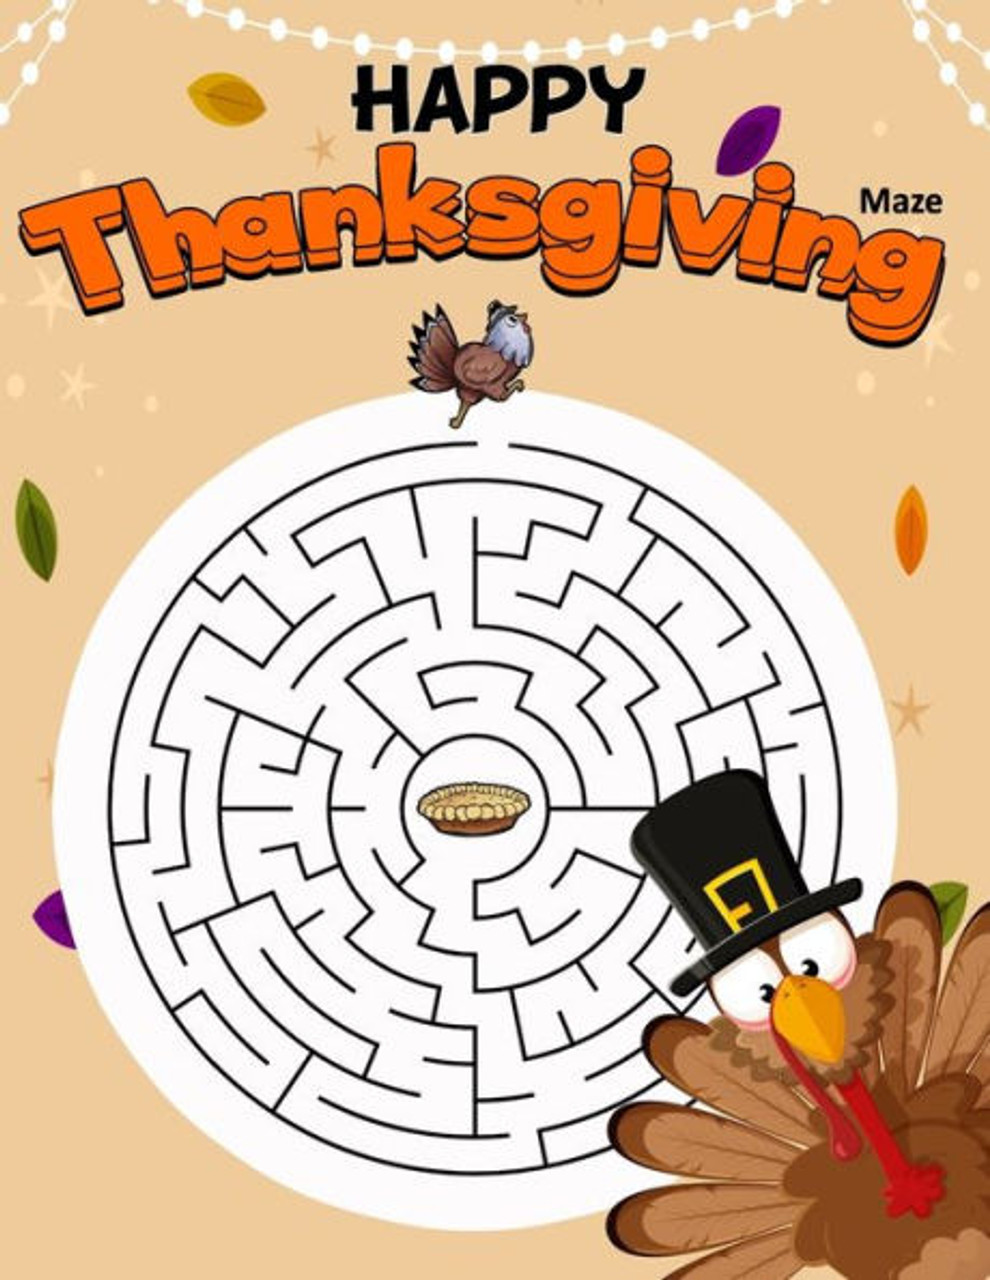 Mazes For Kids Ages 4-8: Maze Activity Book | 4-6, 6-8 | Games, Puzzles and  Problem-Solving for Children (Maze Books for Kids)